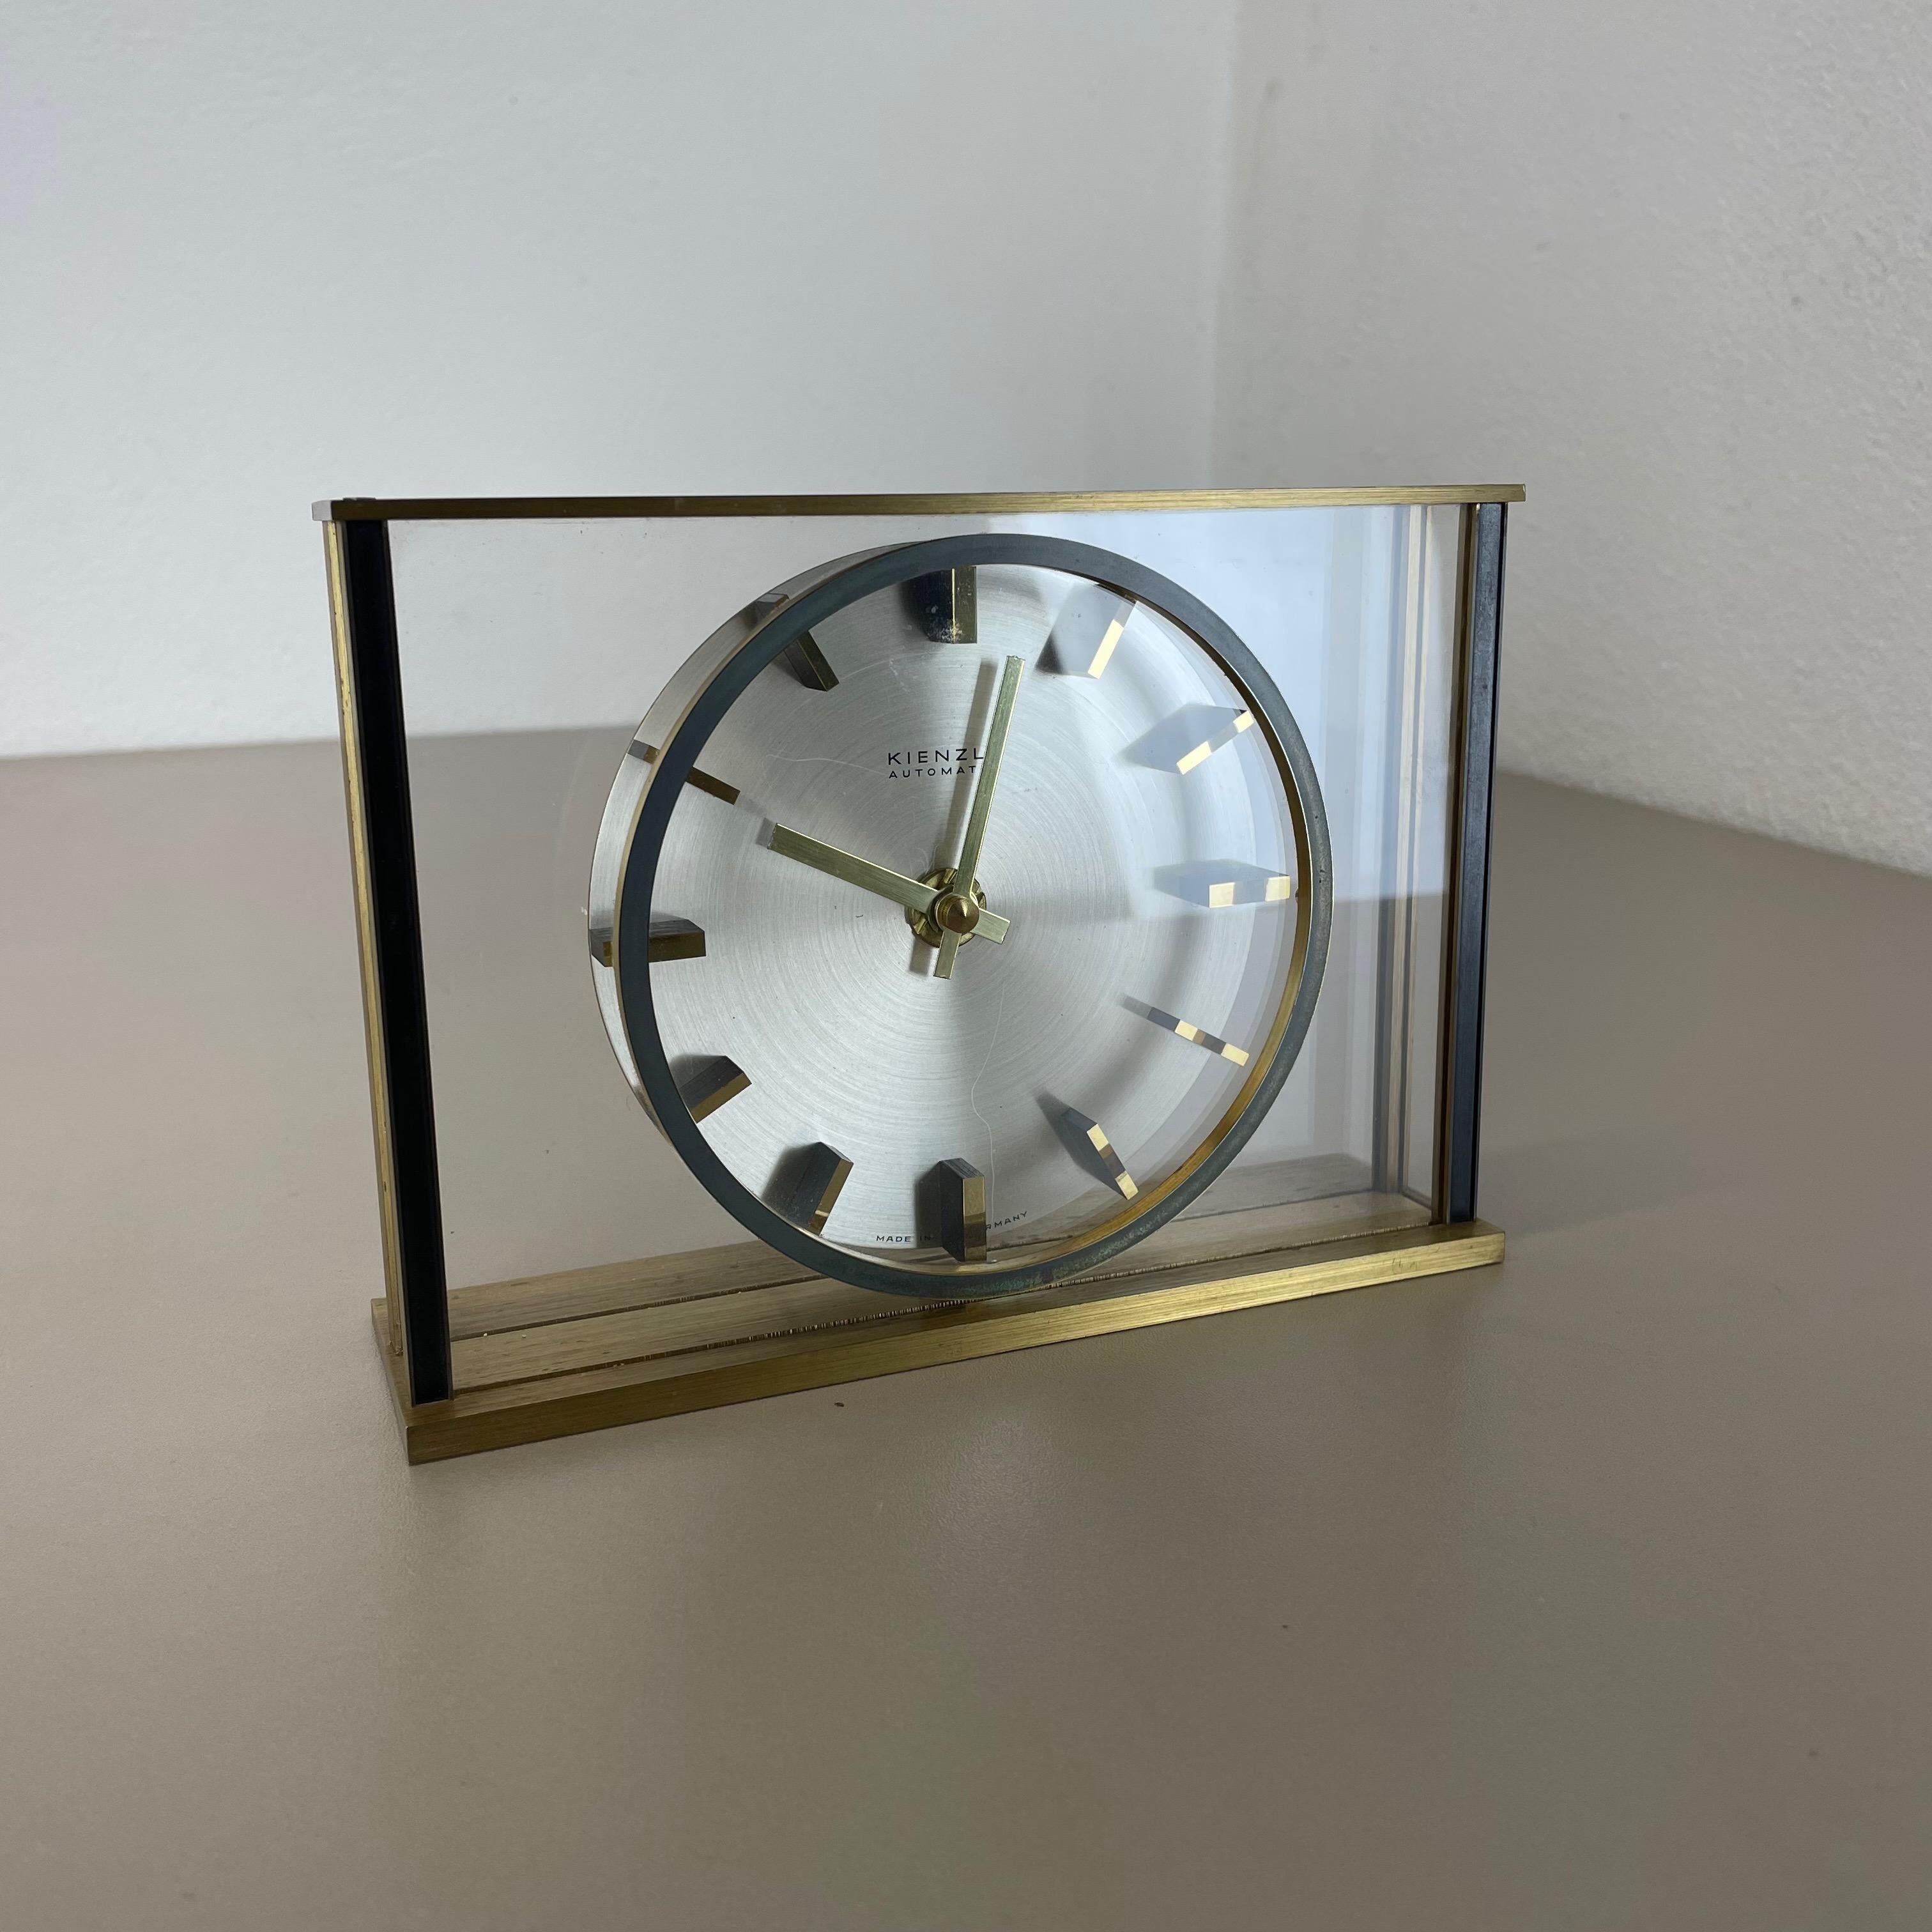 Article:

Table clock



Origin:

Germany


Producer:

Kienzle, Germany


Age:

1970s



This original vintage table clock was produced in the 1970s by the premium clock producer Kienzle in Germany. The clock is original